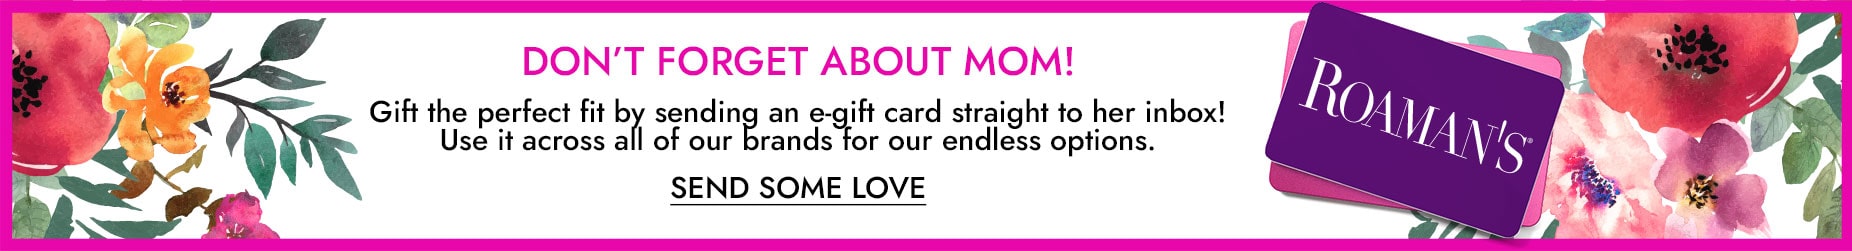 Send some e-gift card love to Mom